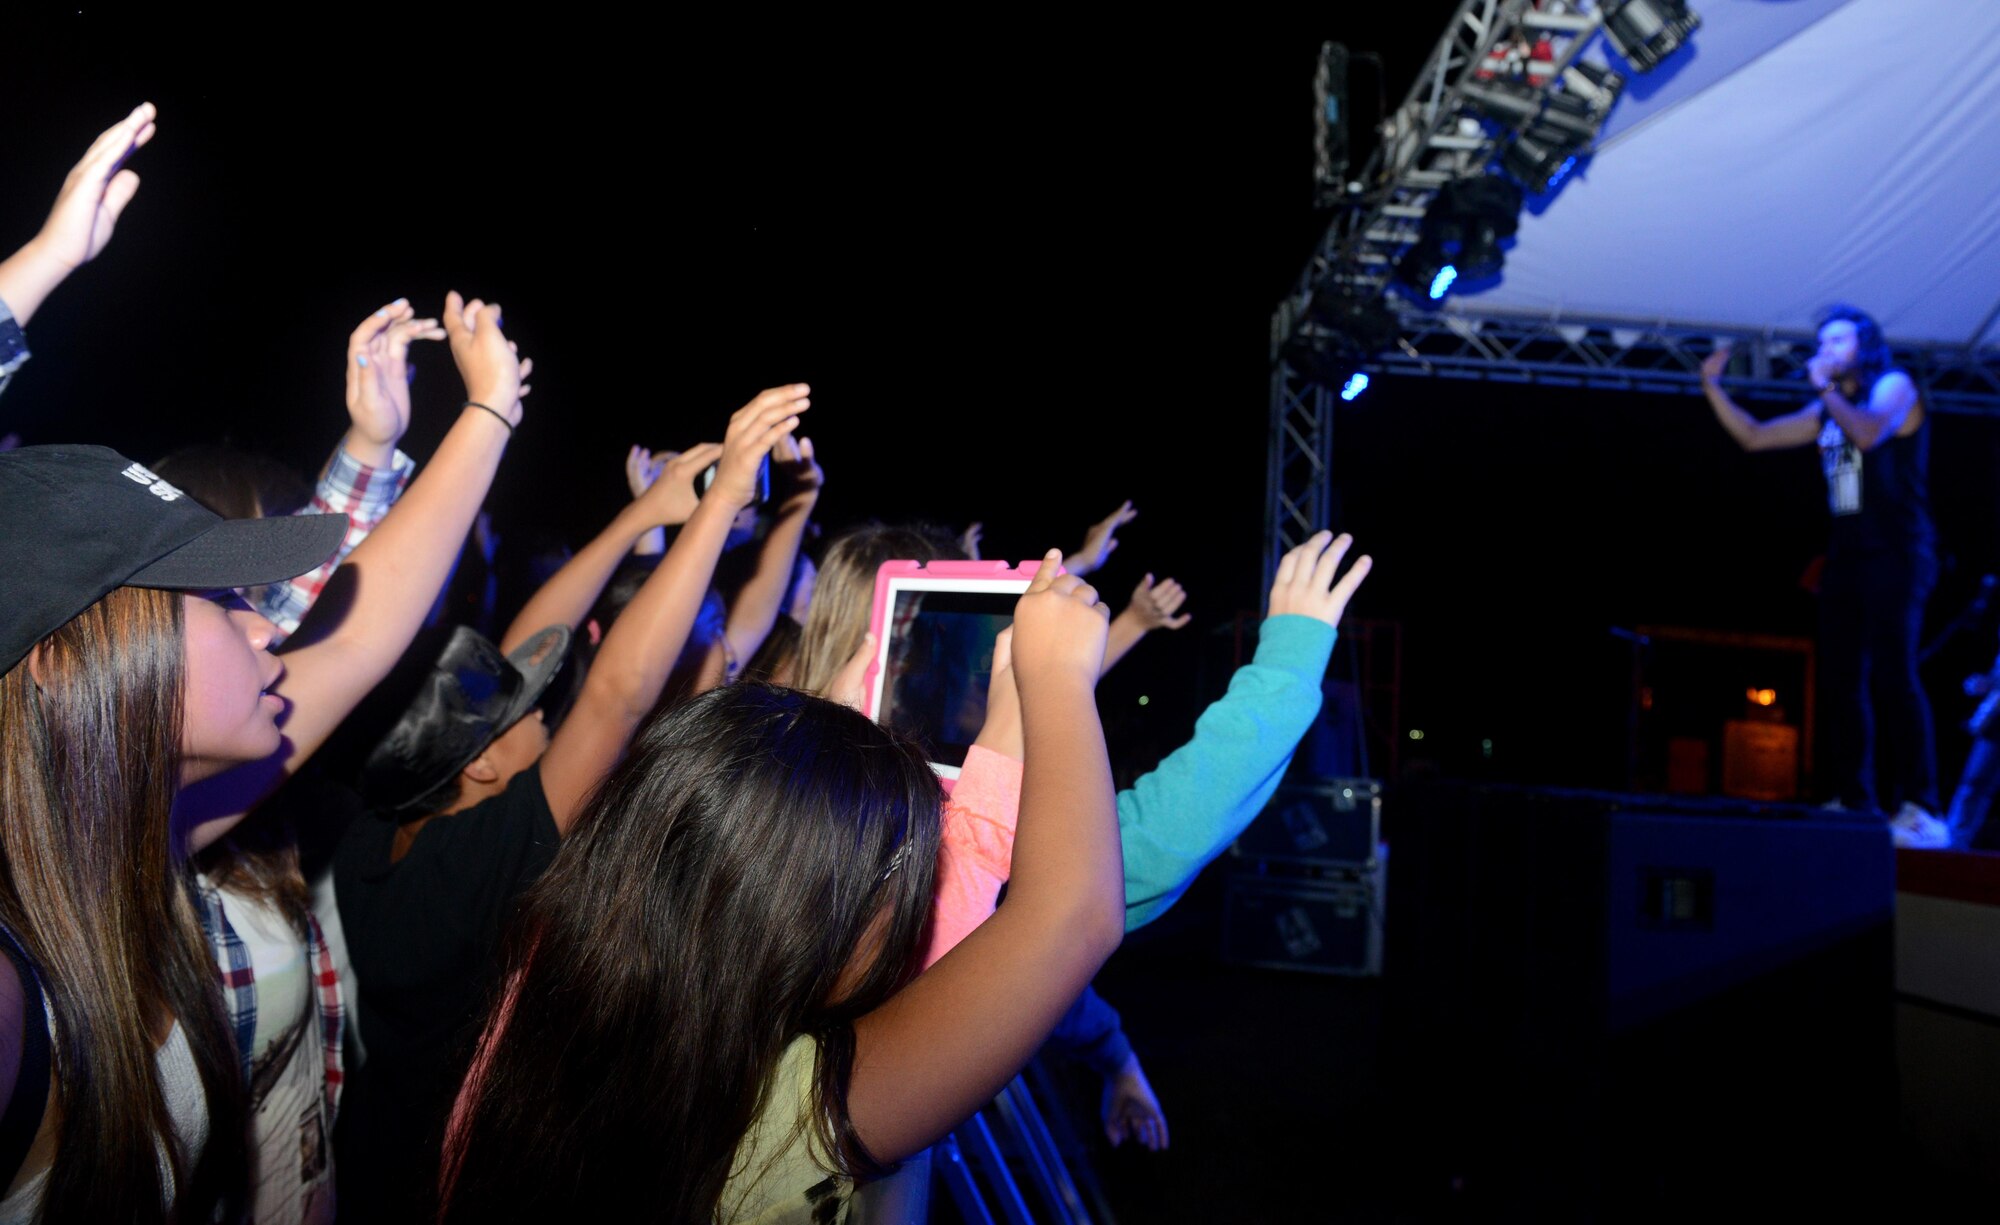 A crowd of service members and their families wave their arms as the Canadian reggae fusion band Magic! performs  a song Jan. 14, 2016, at Andersen Air Force Base, Guam. The band is well known for their debut single ‘Rude.’ (U.S. Air Force photo/Airman 1st Class Arielle Vasquez)